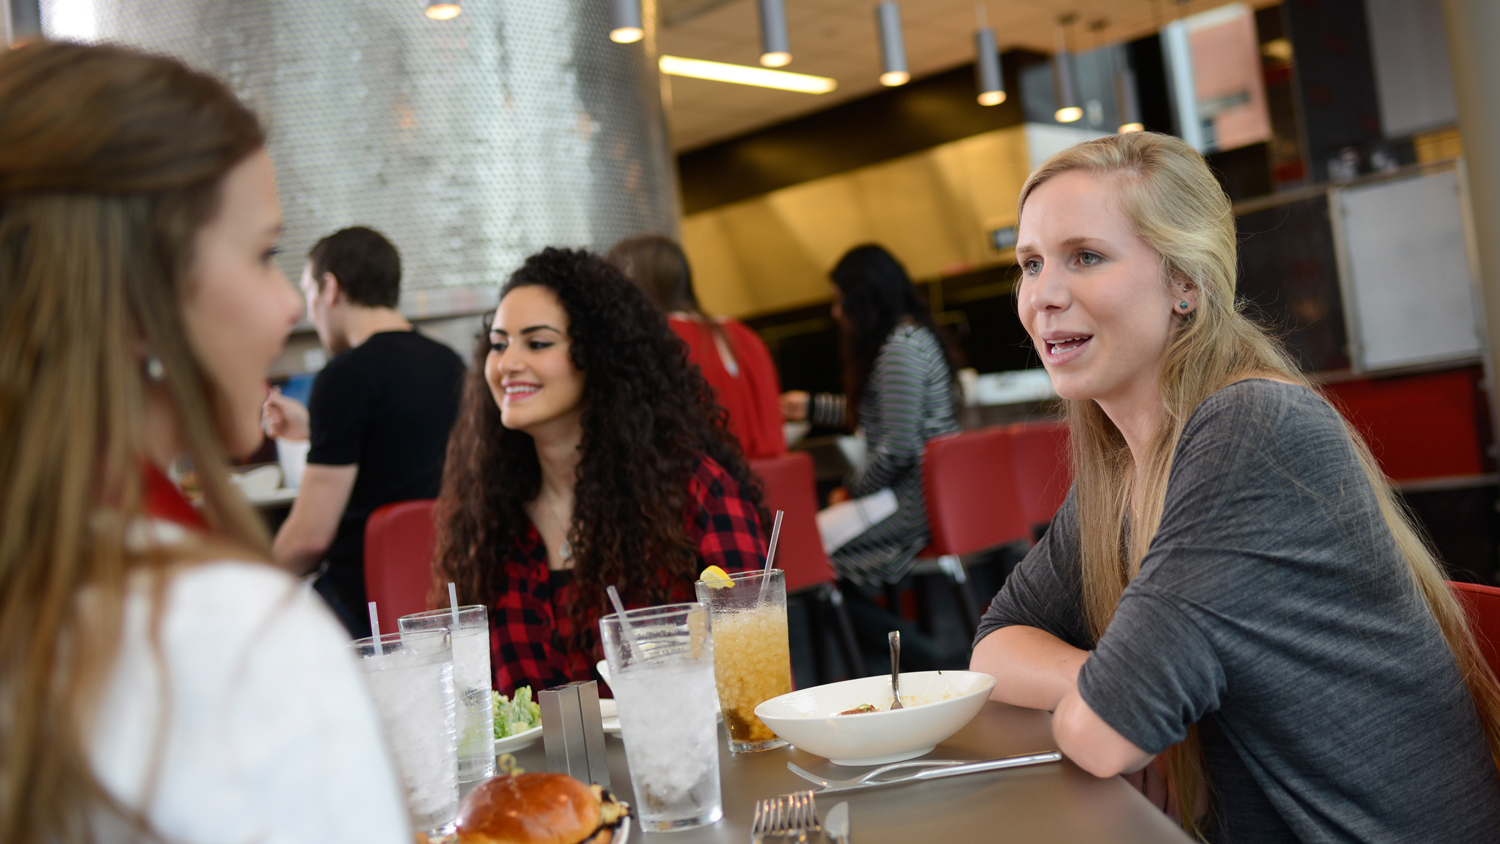 Students enjoying lunch at NC State's Talley Student Union